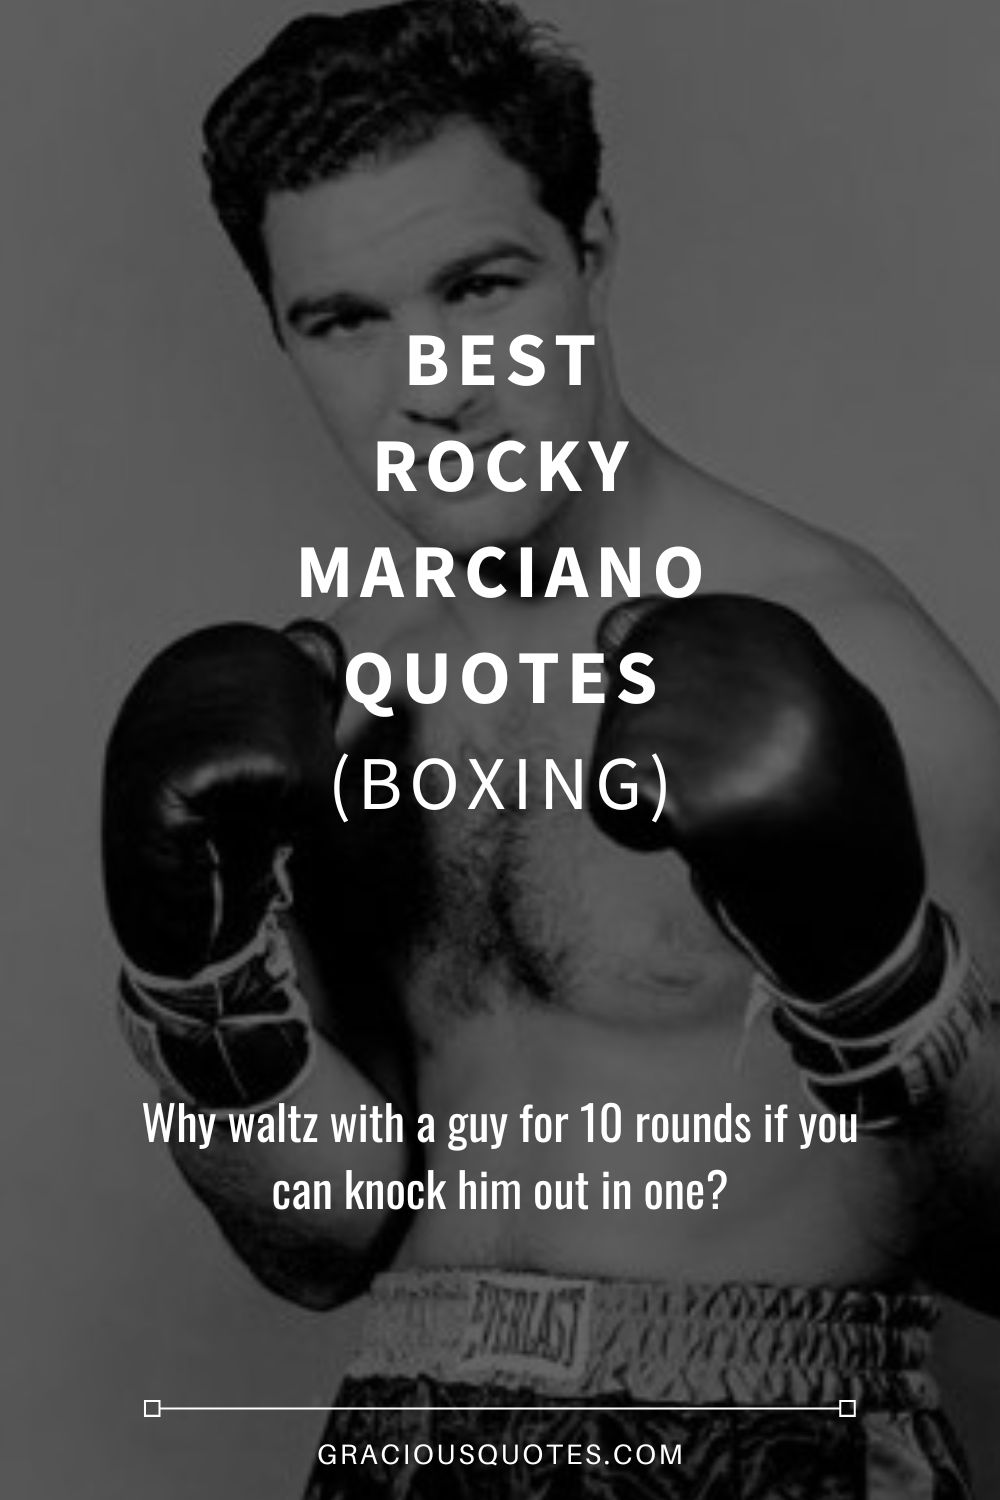 Best Rocky Marciano Quotes (BOXING) - Gracious Quotes